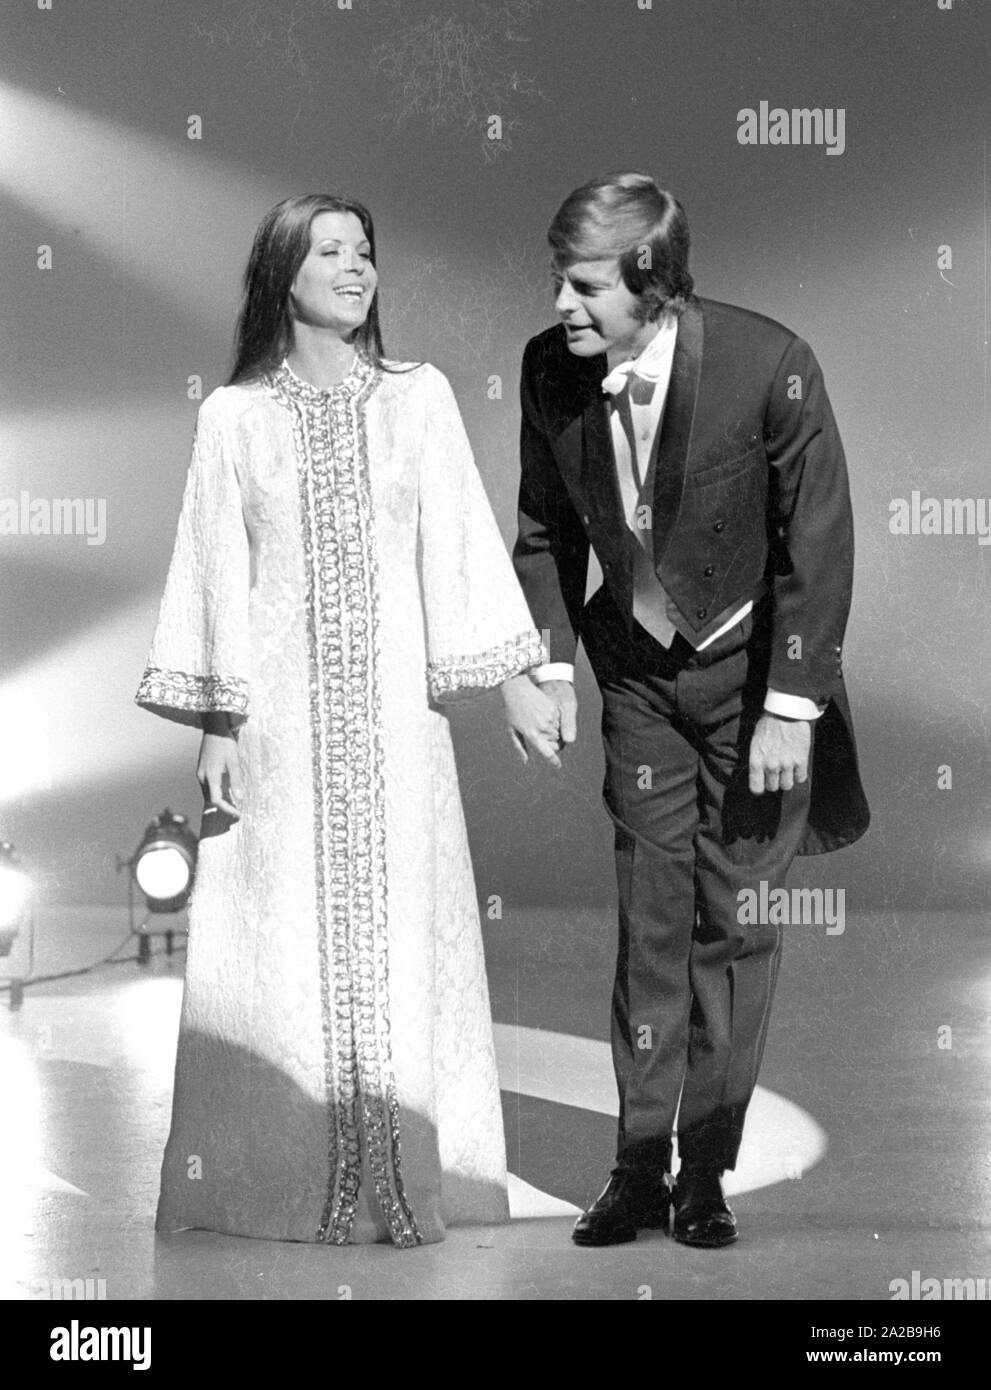 The American actors Tina Sinatra and Robert Wagner at a shooting, probably for the TV series 'It Takes a Thief', in which Wagner plays the lead role. Stock Photo